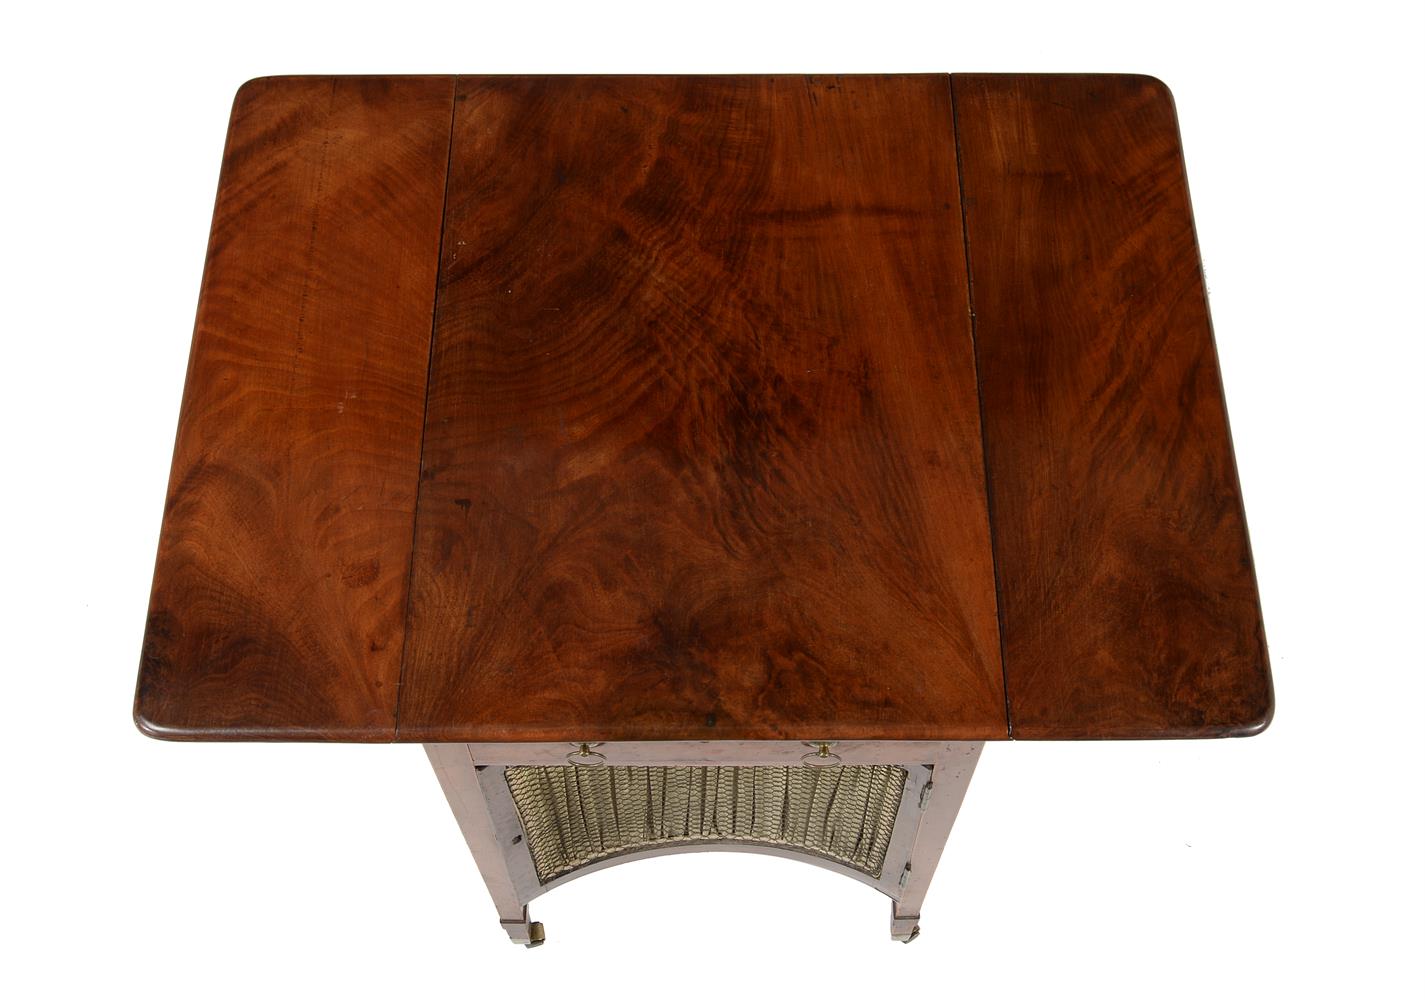 A GEORGE III MAHOGANY AND LINE INLAID PEMBROKE 'BREAKFAST' TABLE, CIRCA 1800 - Image 2 of 5